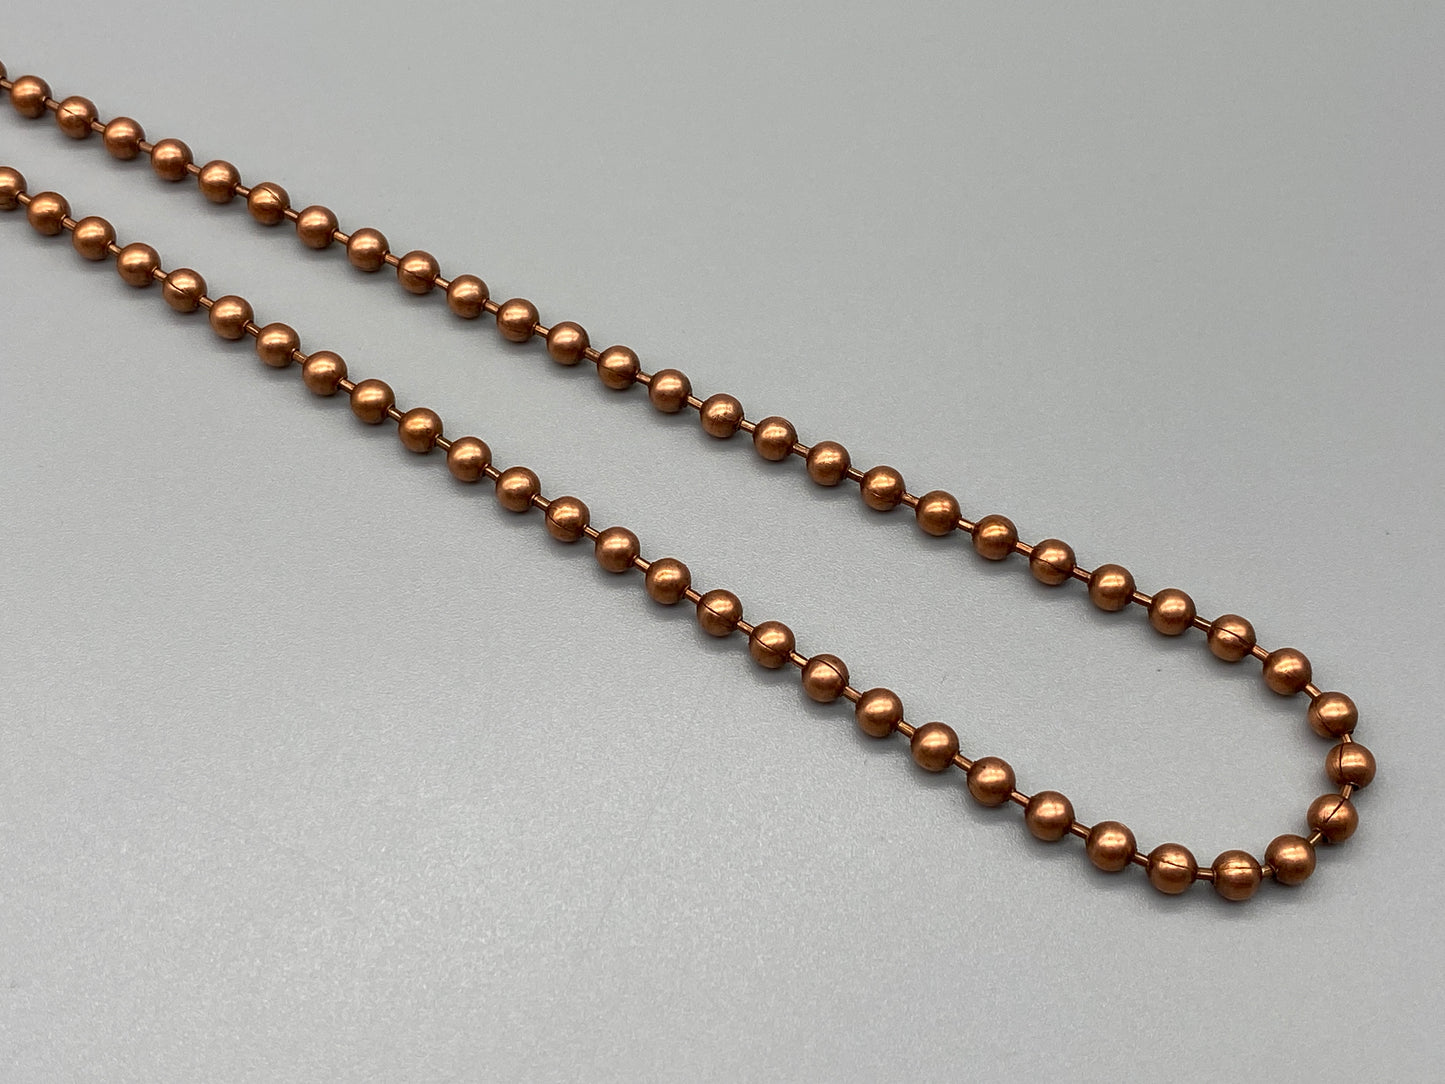 Endless Antique Copper Metal Chain - No.10 Bead Size: 4.5mm Loop